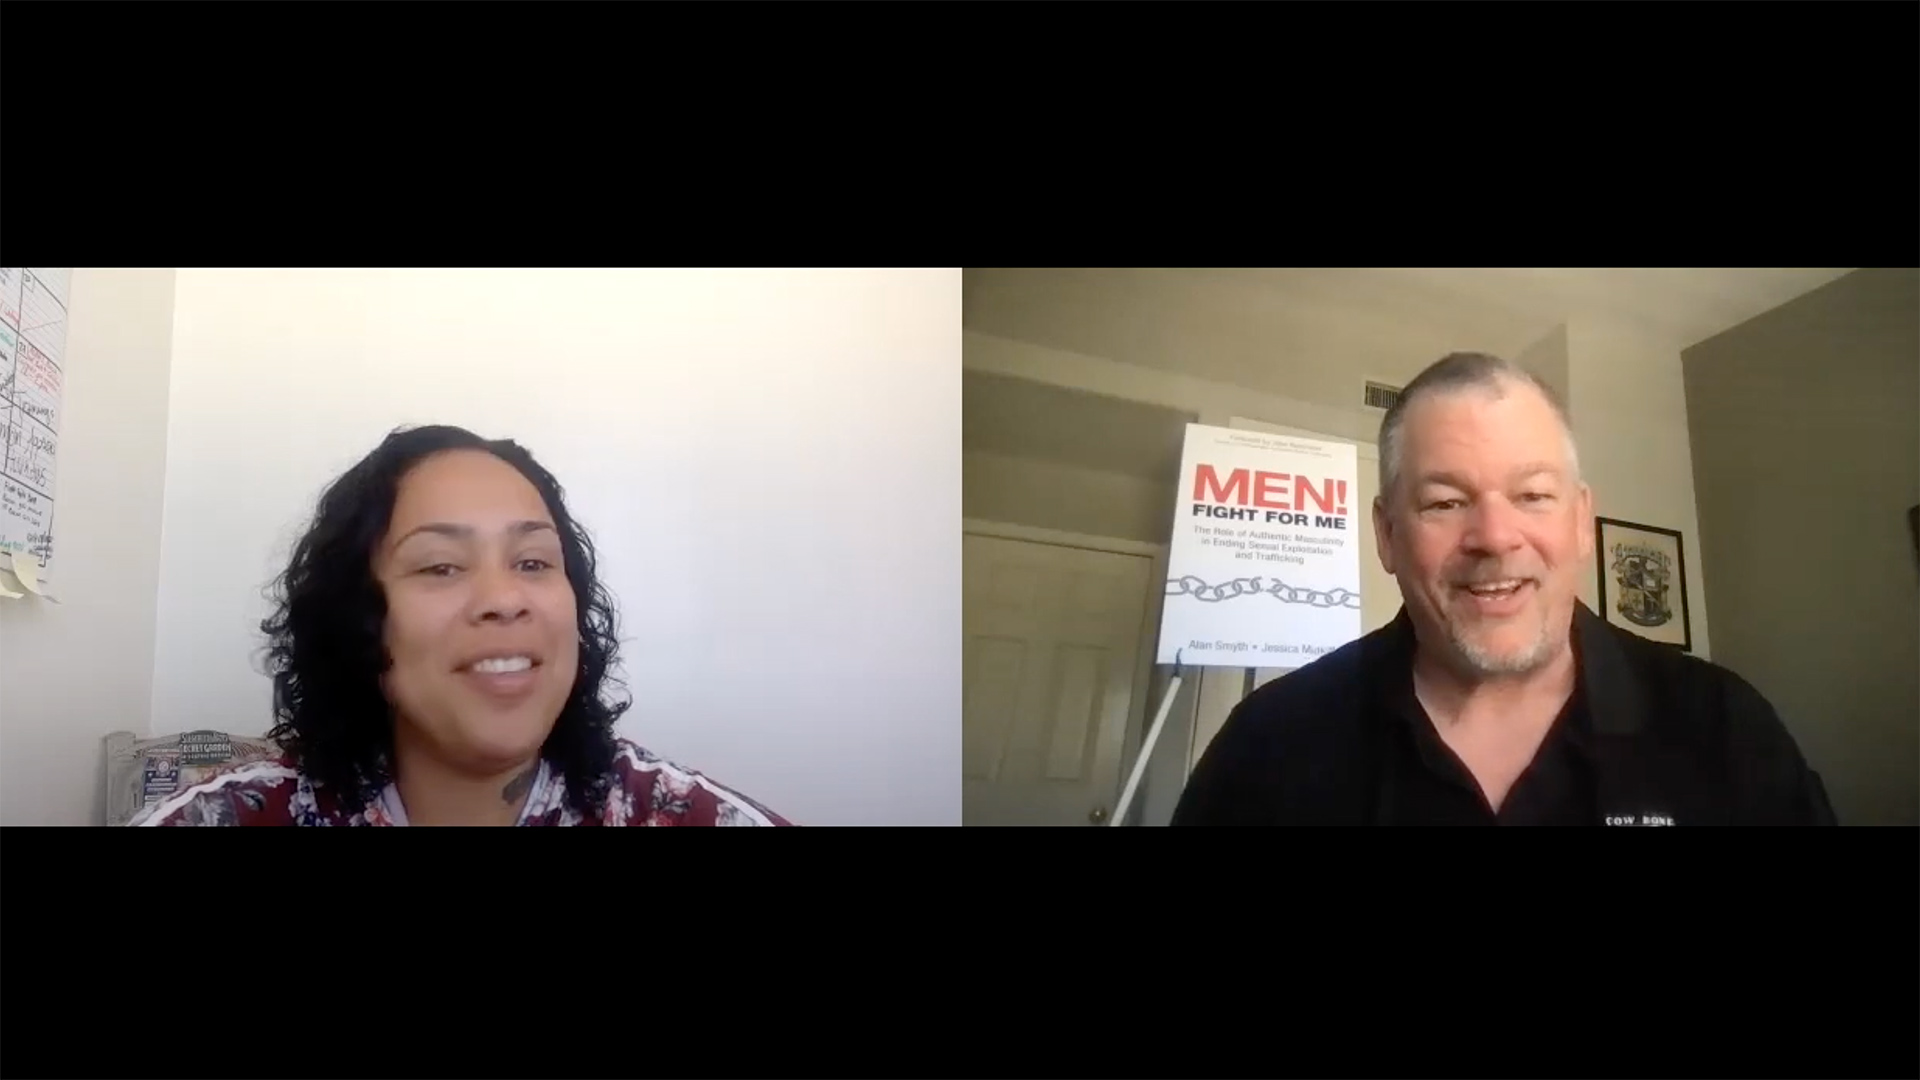 Jessica MidKiff and Alan Smyth discuss Men! Fight for Me chapter 2